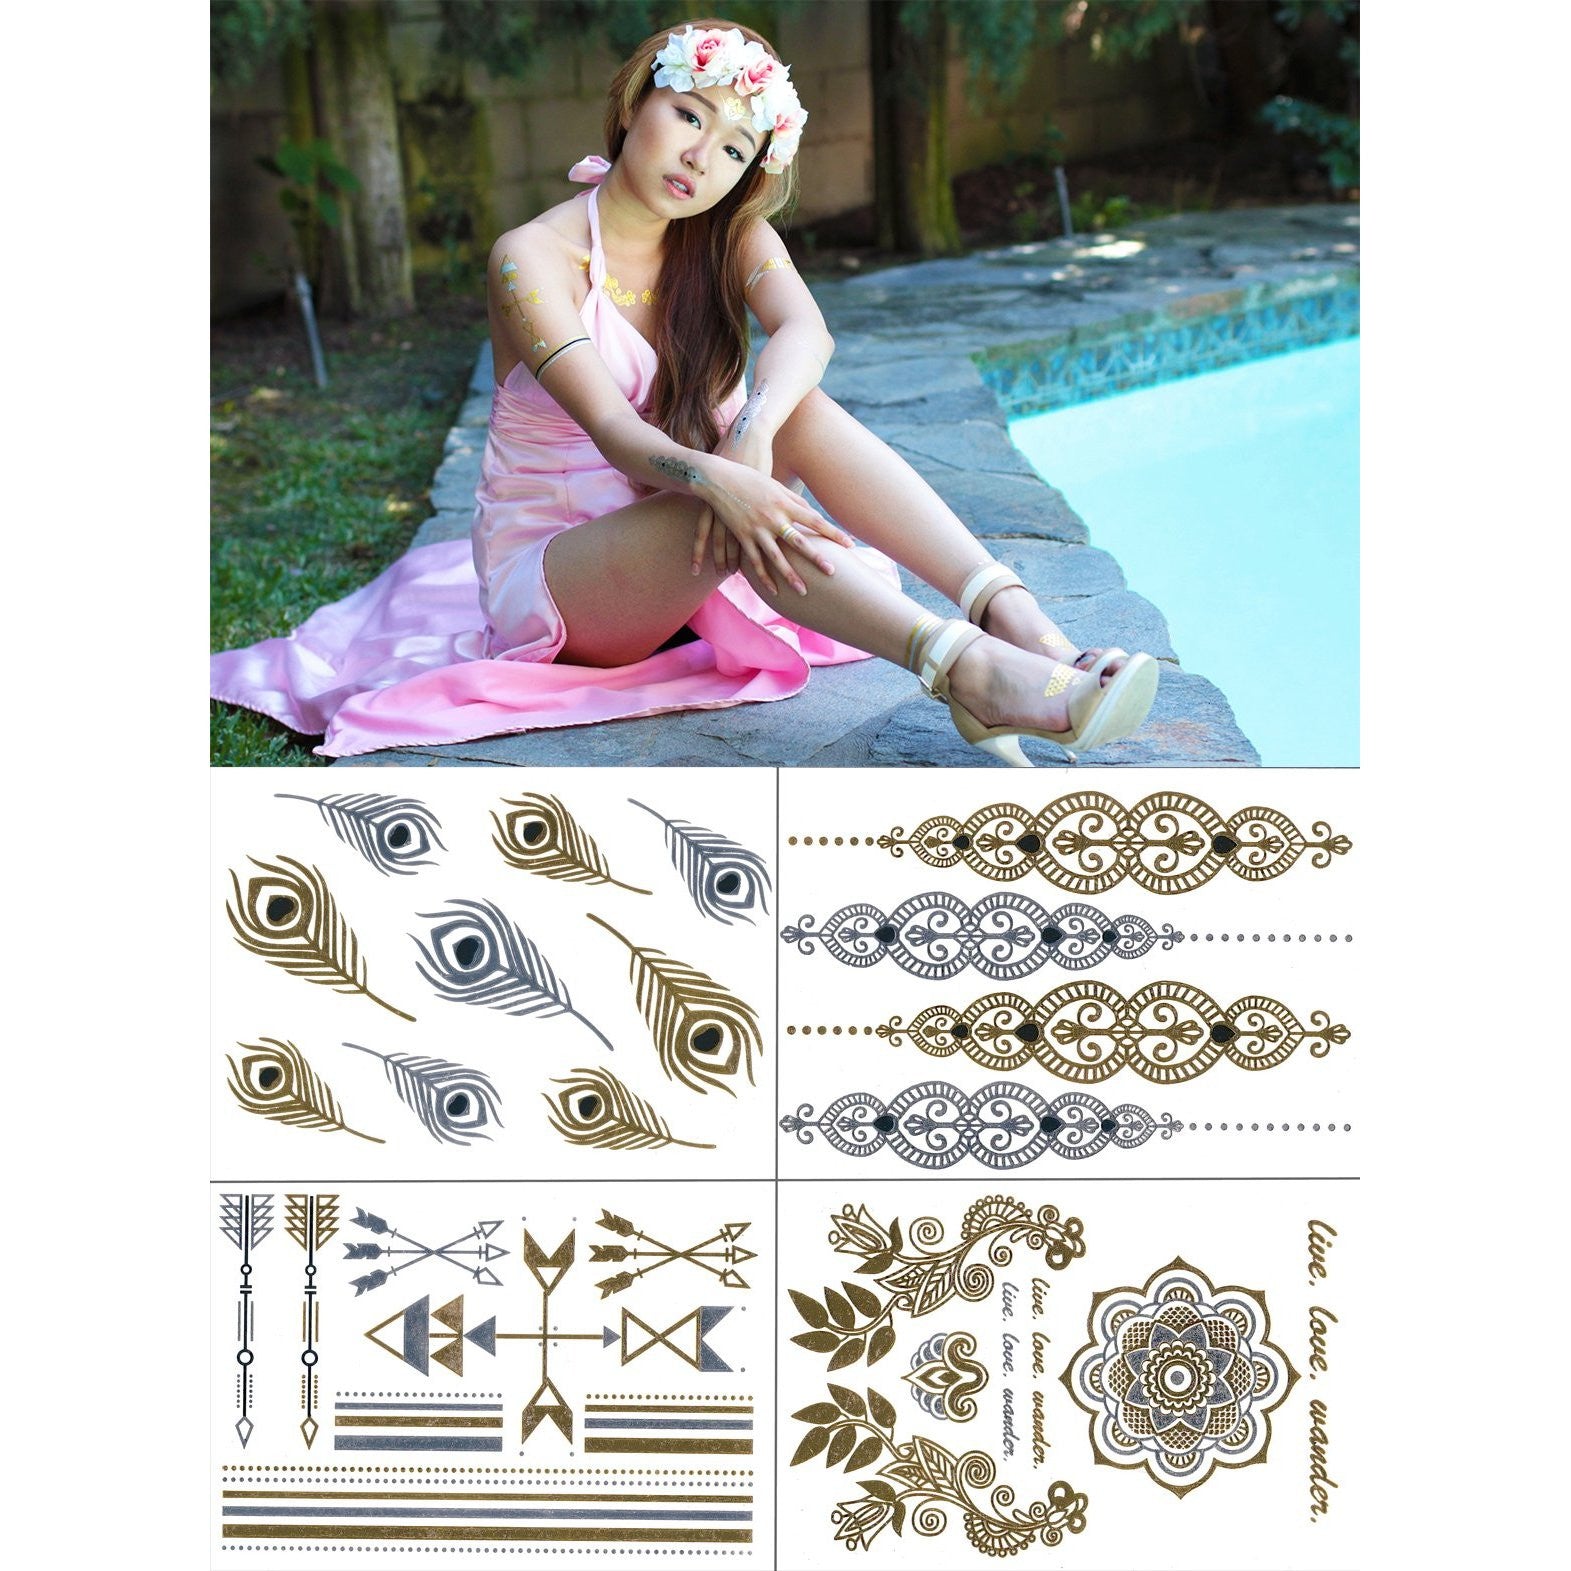 Temporary Metallic Tattoos Pack (Set of 4 Sheets) by BG247